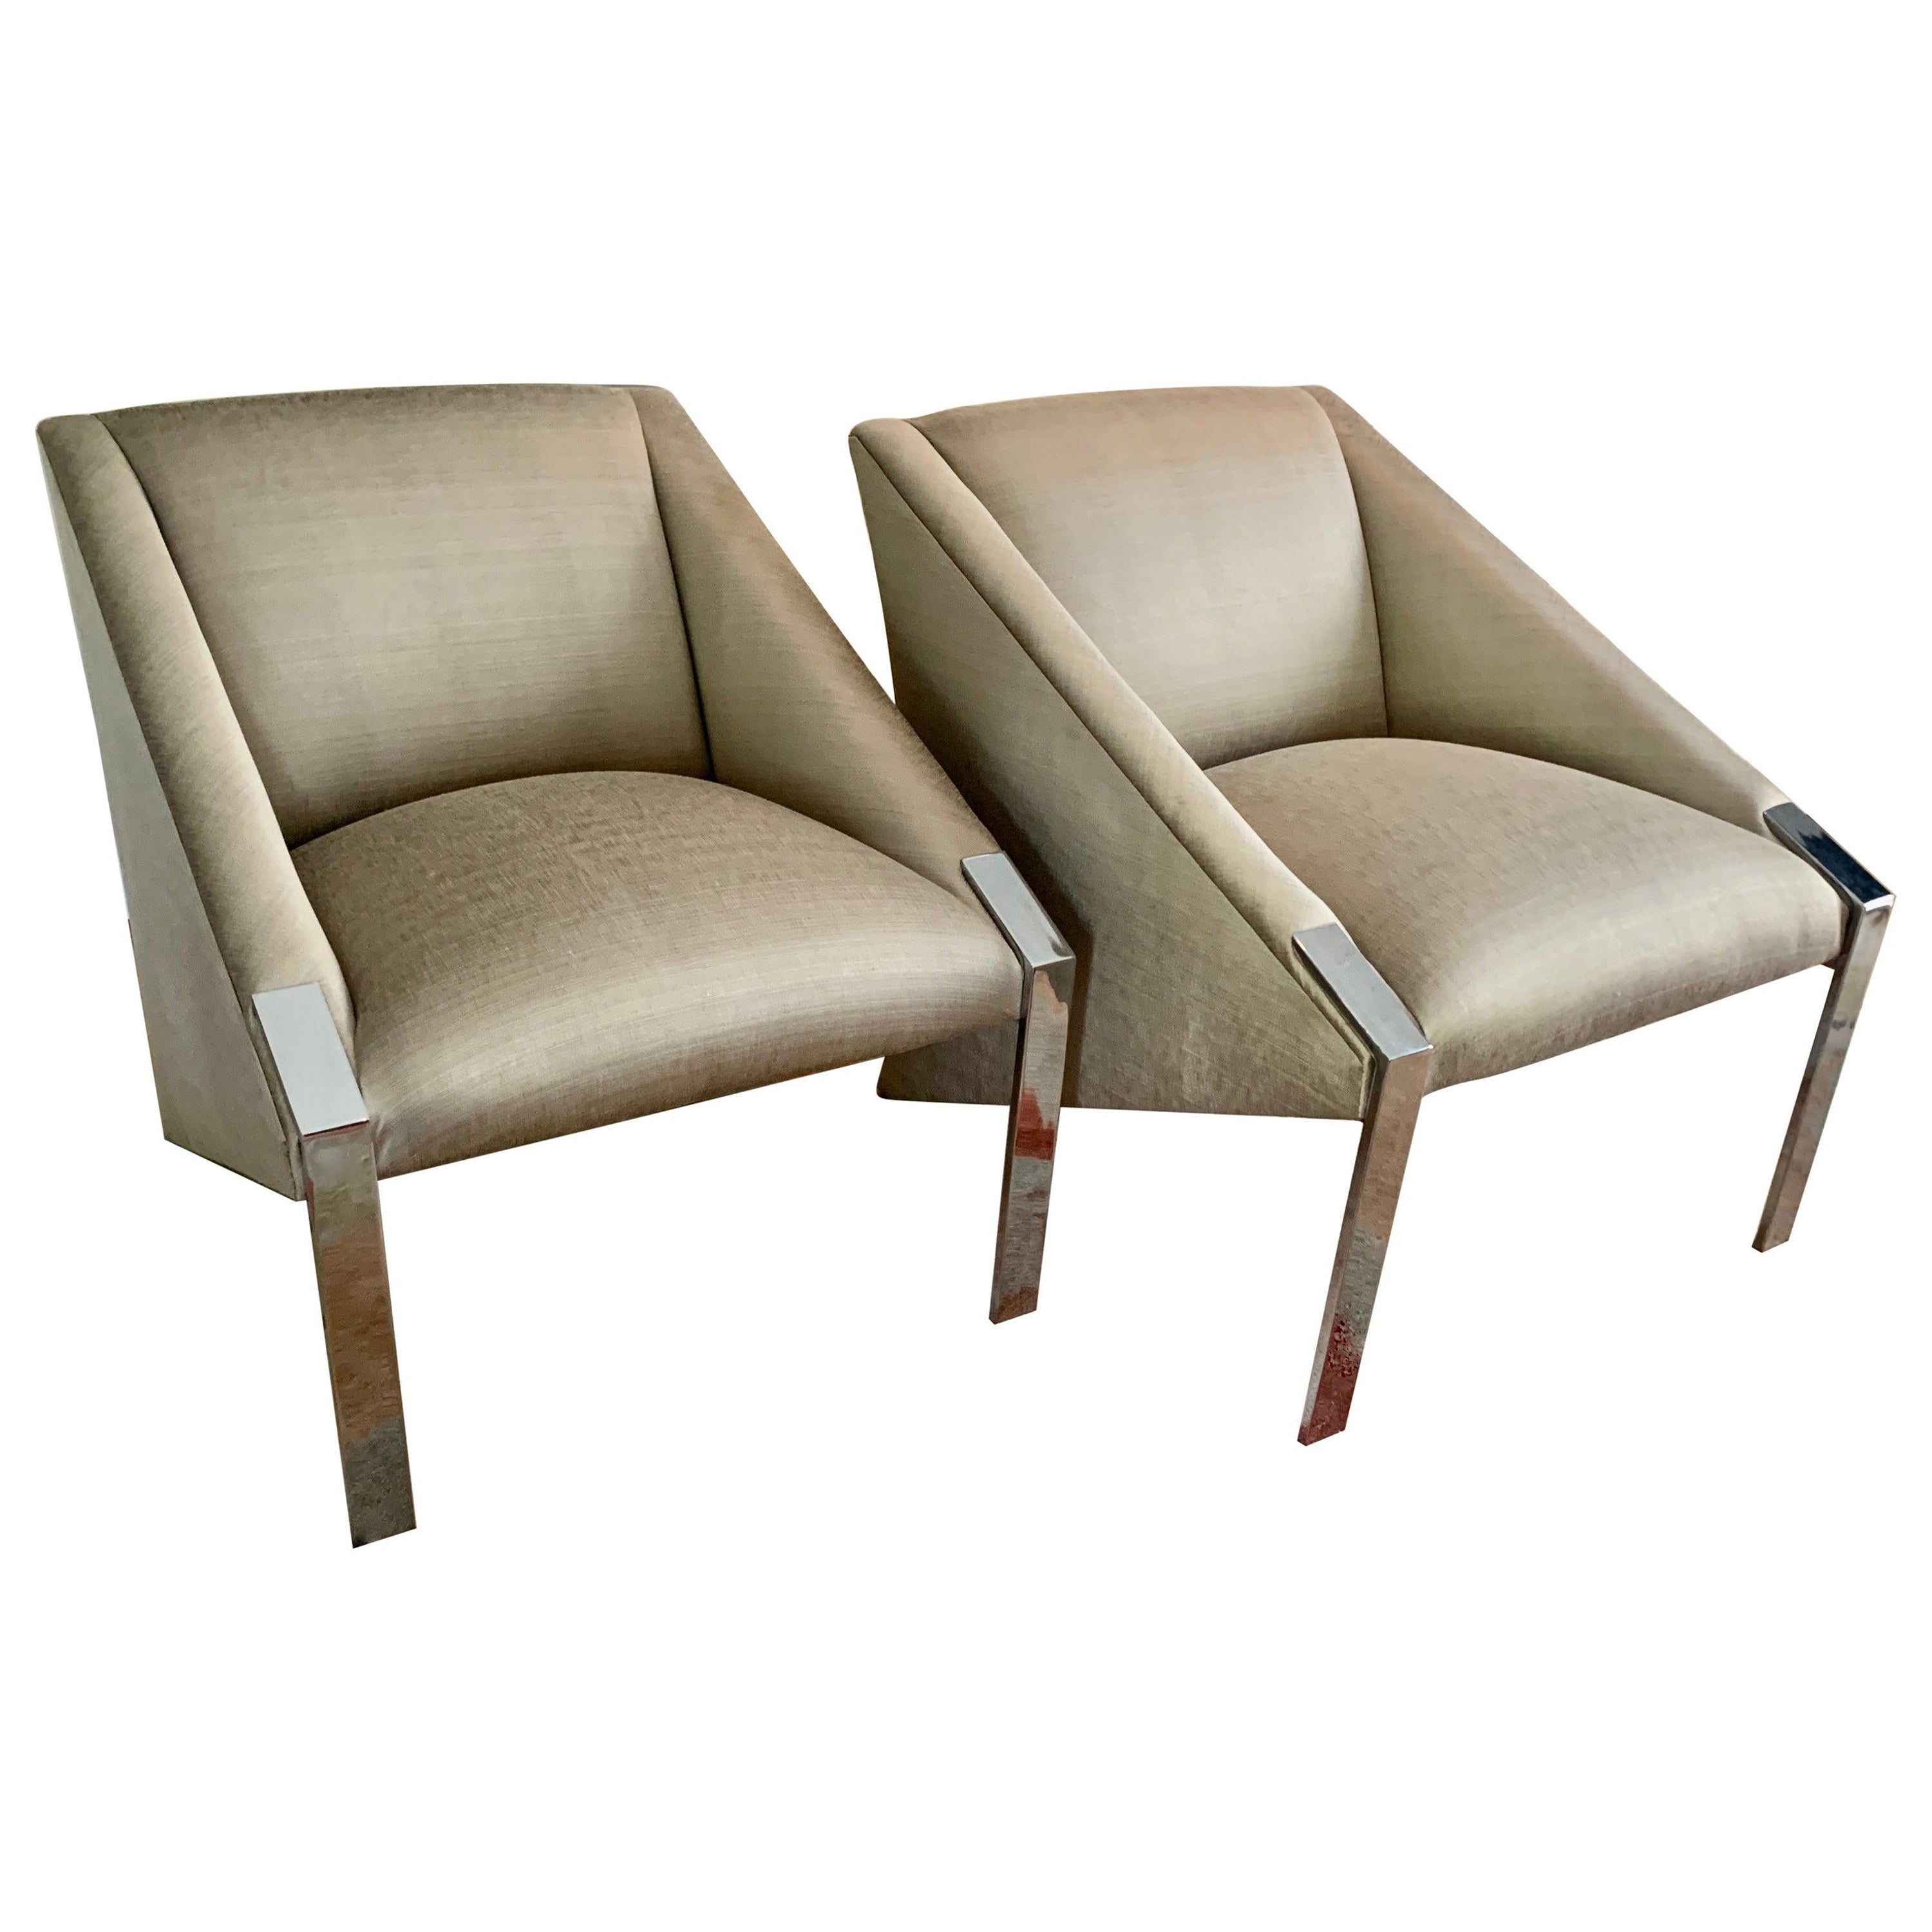 Andree Putman Pair Chrome Lounge Side Chairs in Silk Upholstery For Sale